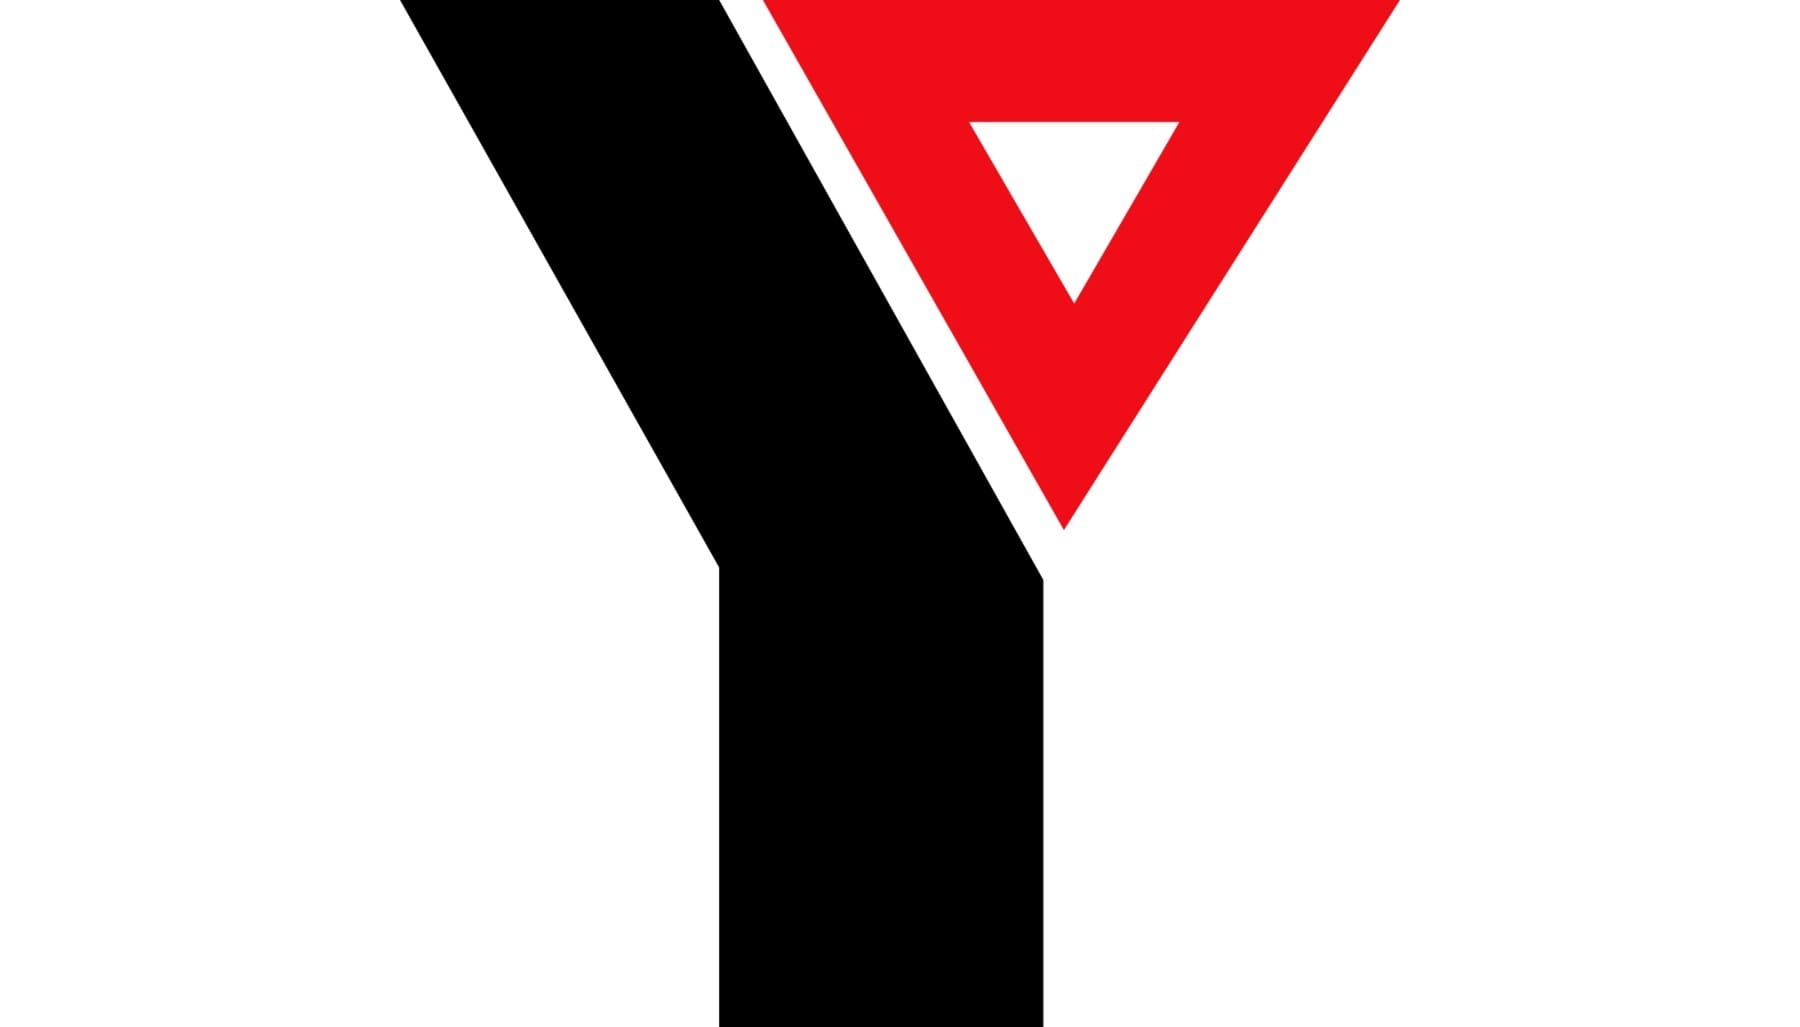 ymca-logo-and-symbol-meaning-history-png